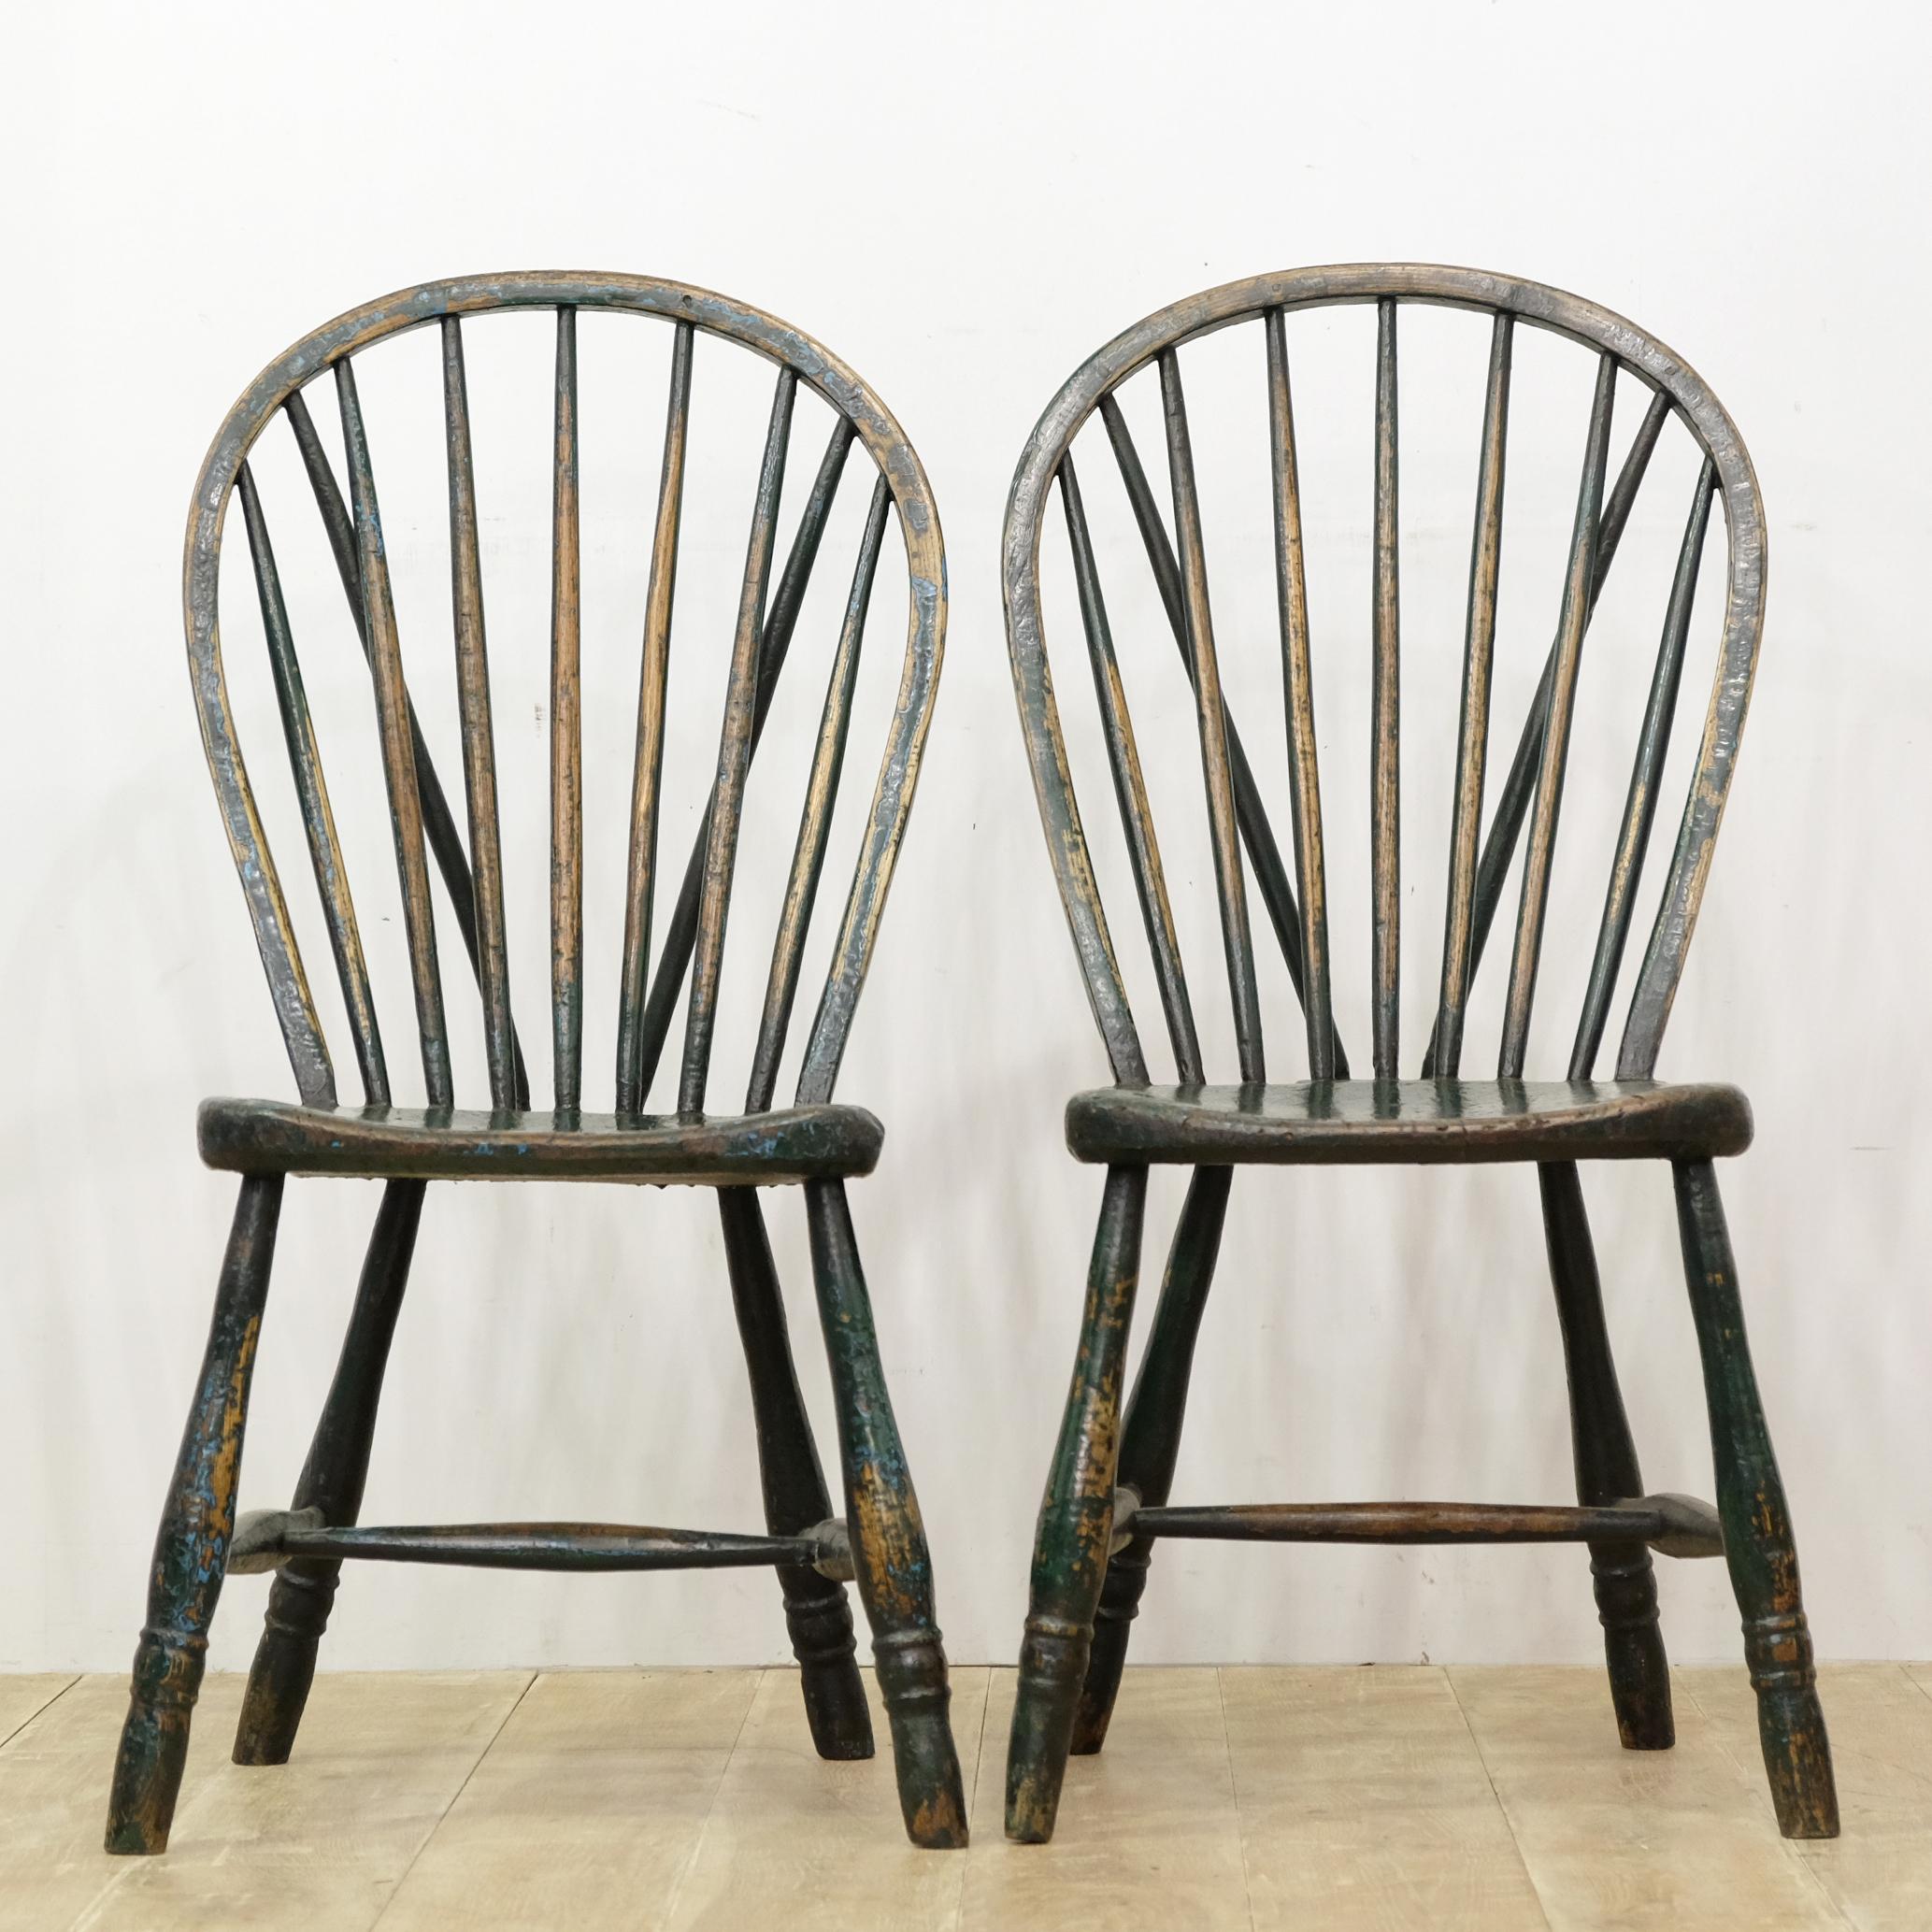 A good pair of West Country side chairs in layers of old paint. Decoratively turned legs with egg and reel pattern, united by a tapered H stretcher. Solid elm slab seats, shaped in a pleasing manner with lots of fetching smooth wear, both to the